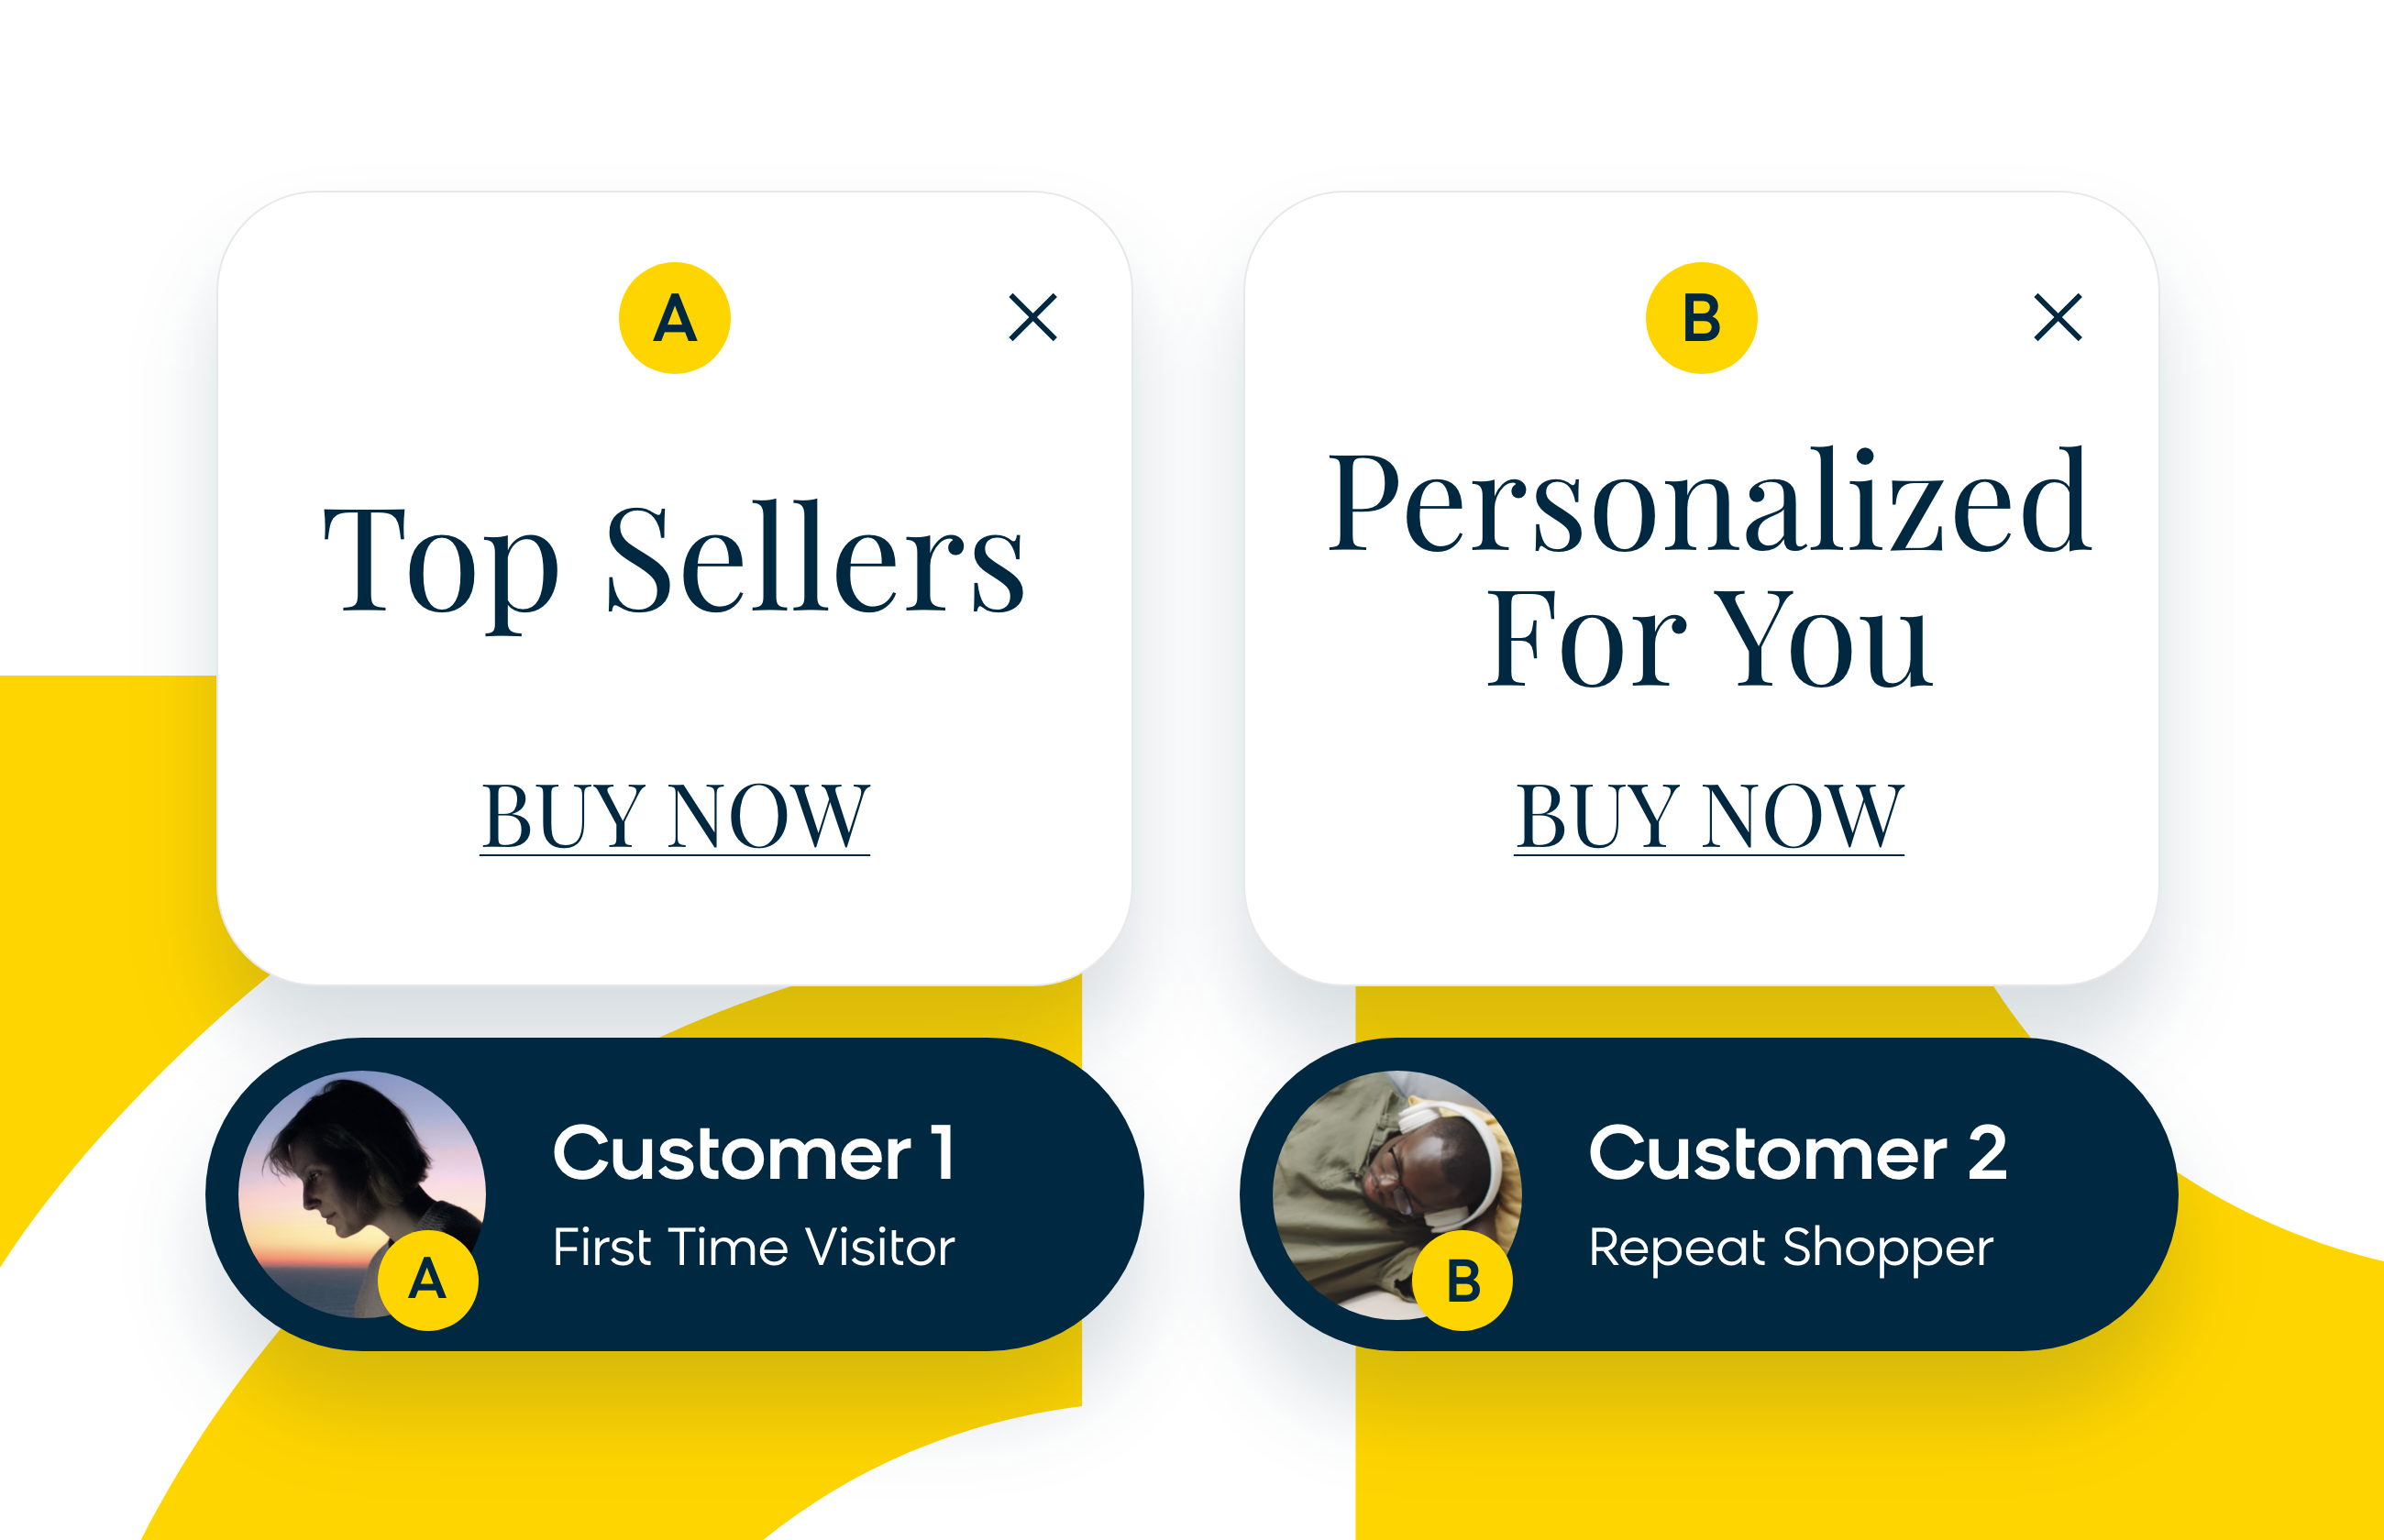 Personalized product recommendations for two different customers